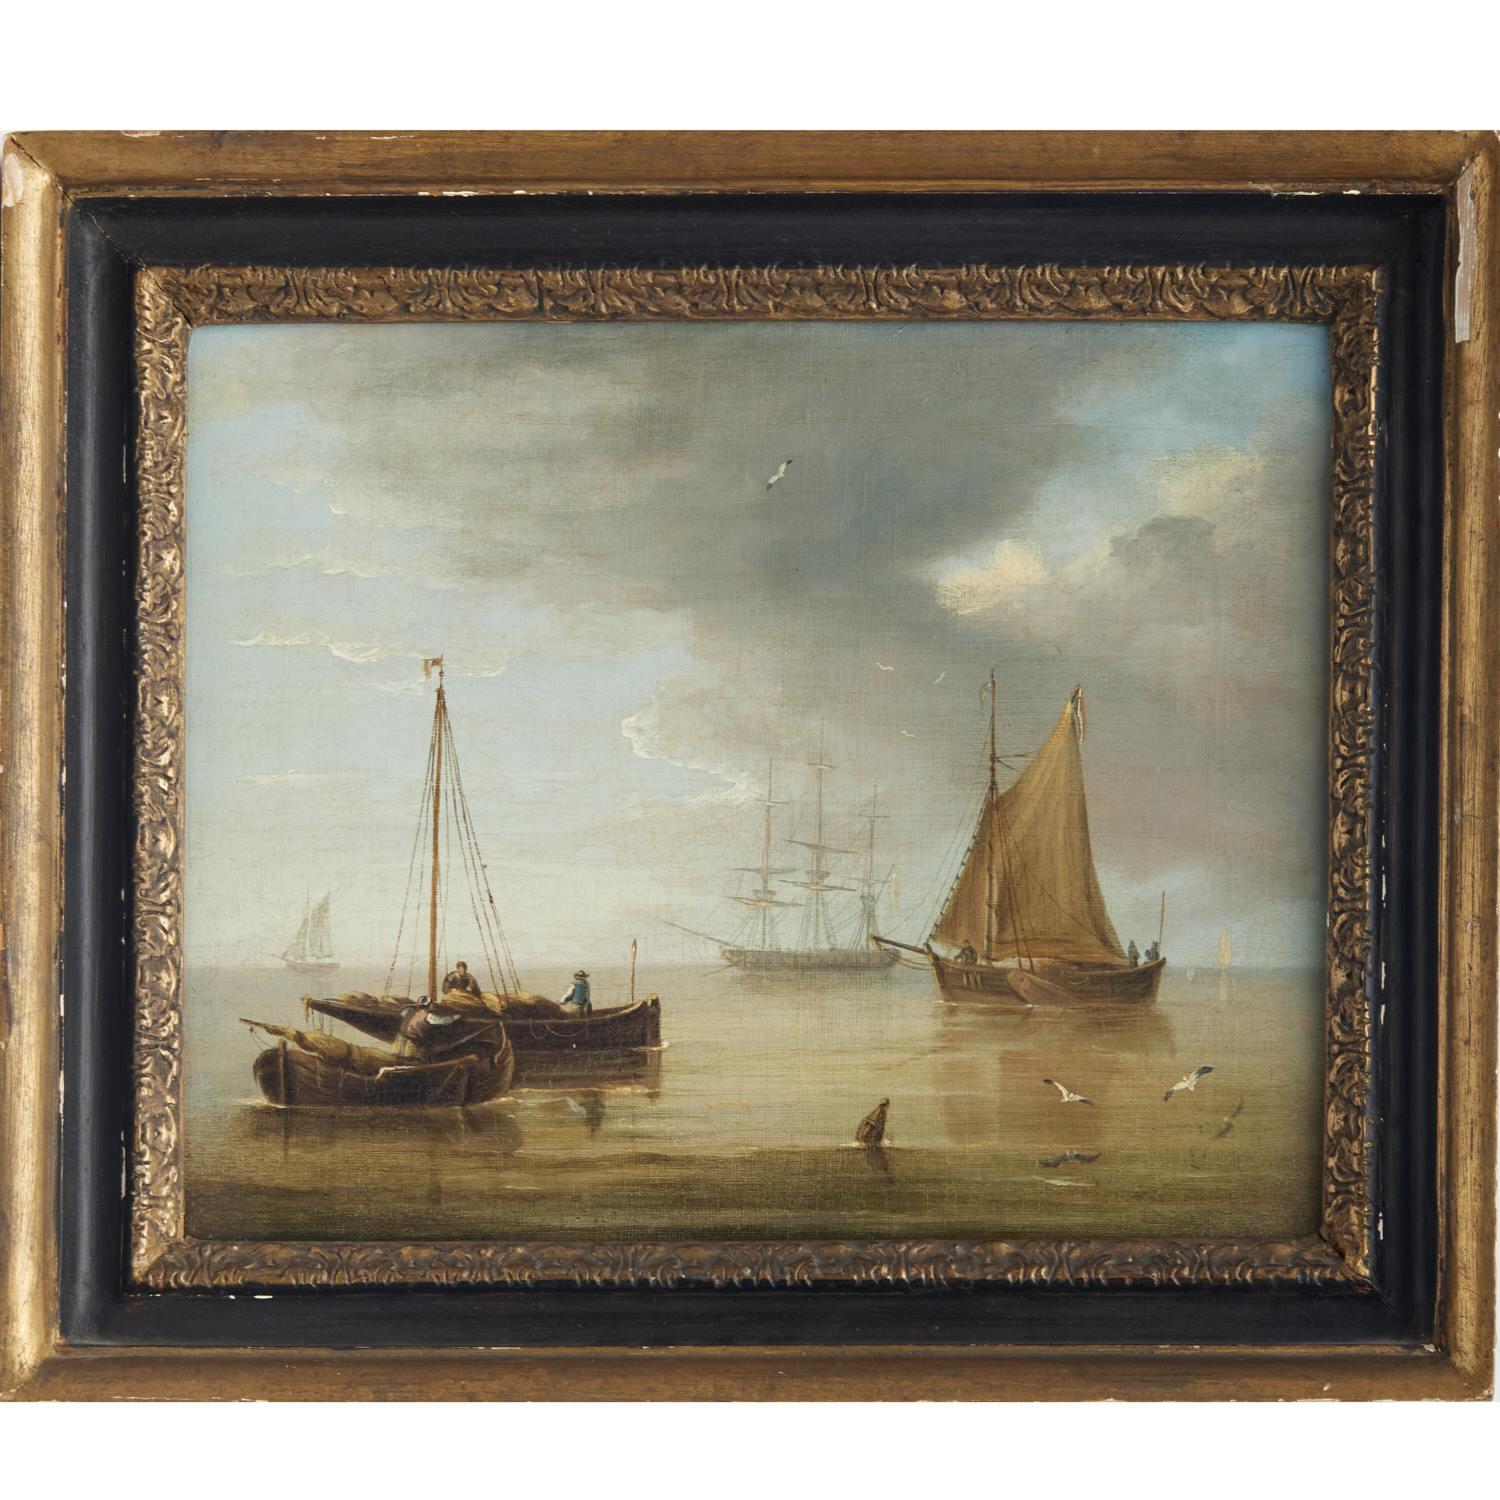 19th Century Mid 19th C. Maritime Seascape Oil Painting on Canvas Manner of Adolphus Knell For Sale